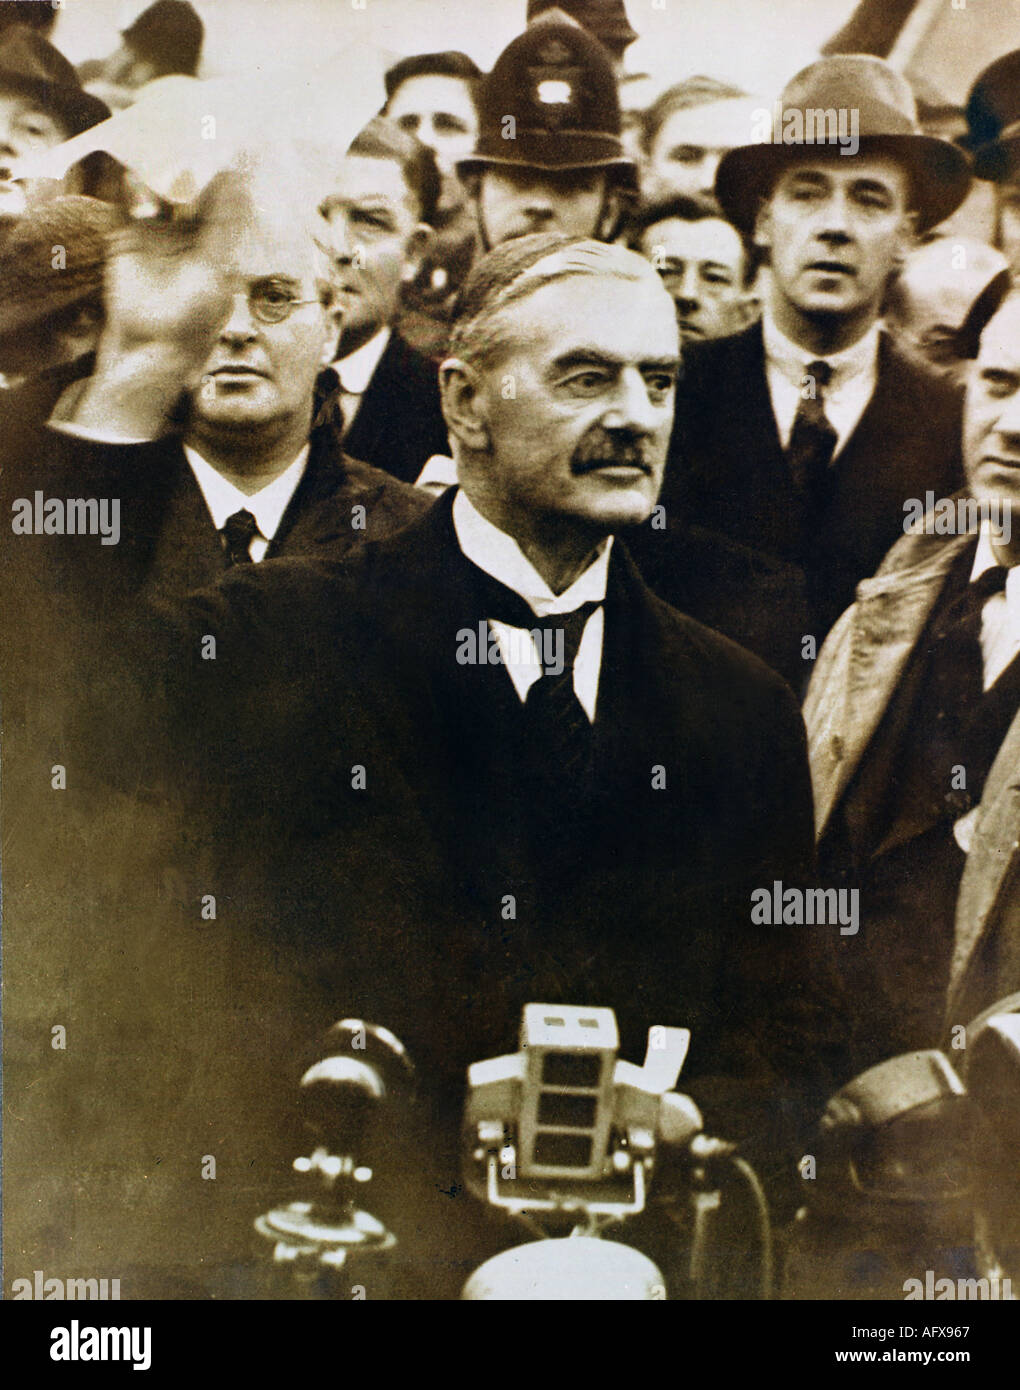 boykot Isaac efterfølger Neville Chamberlain Peace In Our Time 1938 Stock Photo - Alamy